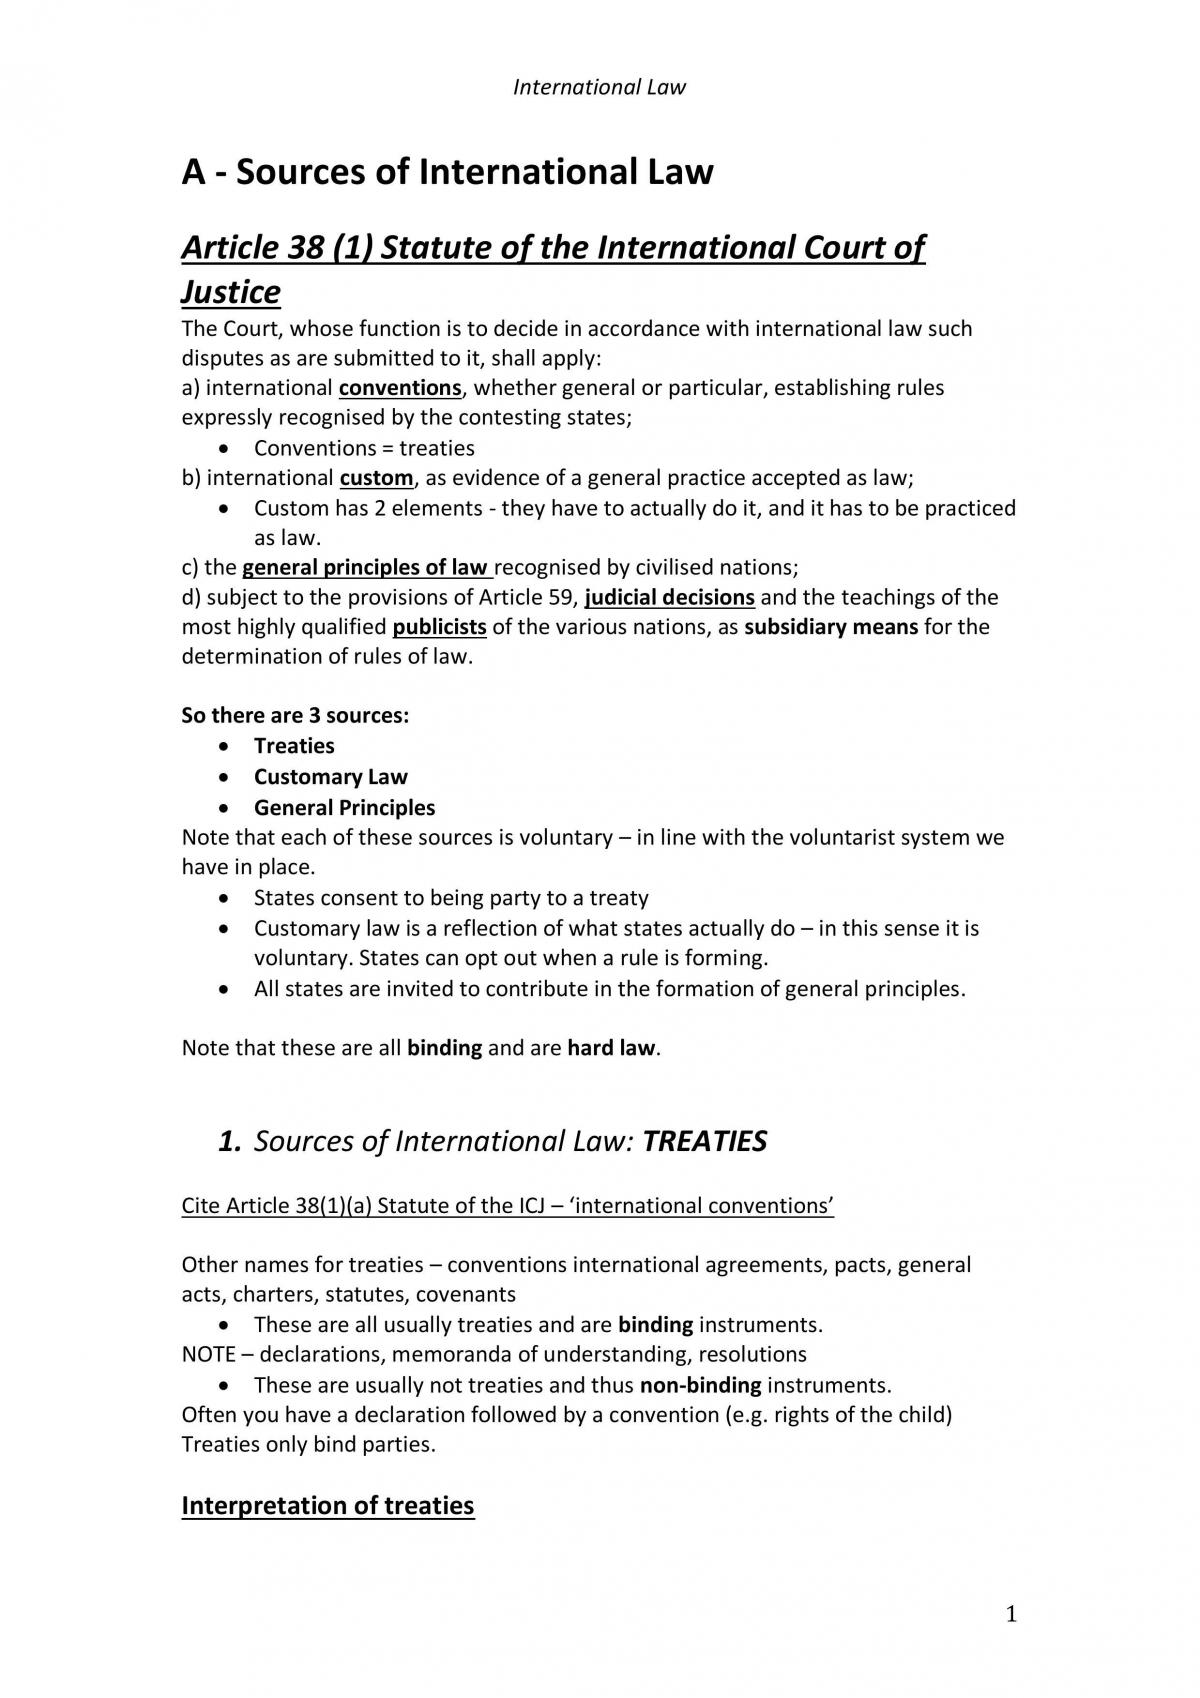 International Law full subject notes - Page 1